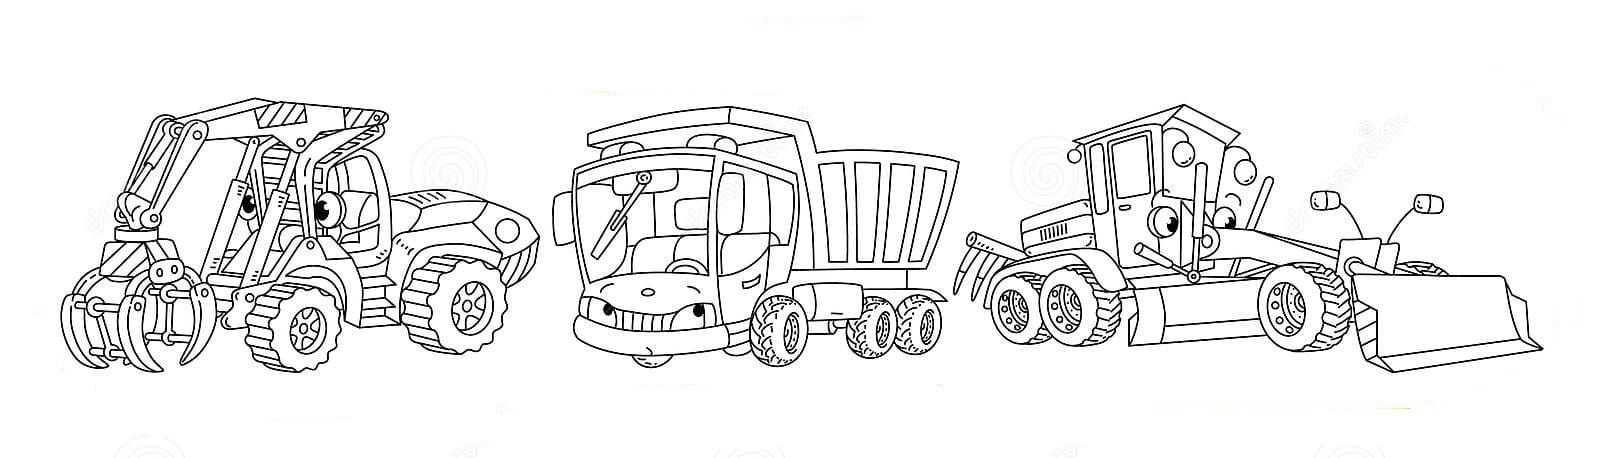 Funny heavy machinery transport coloring book set